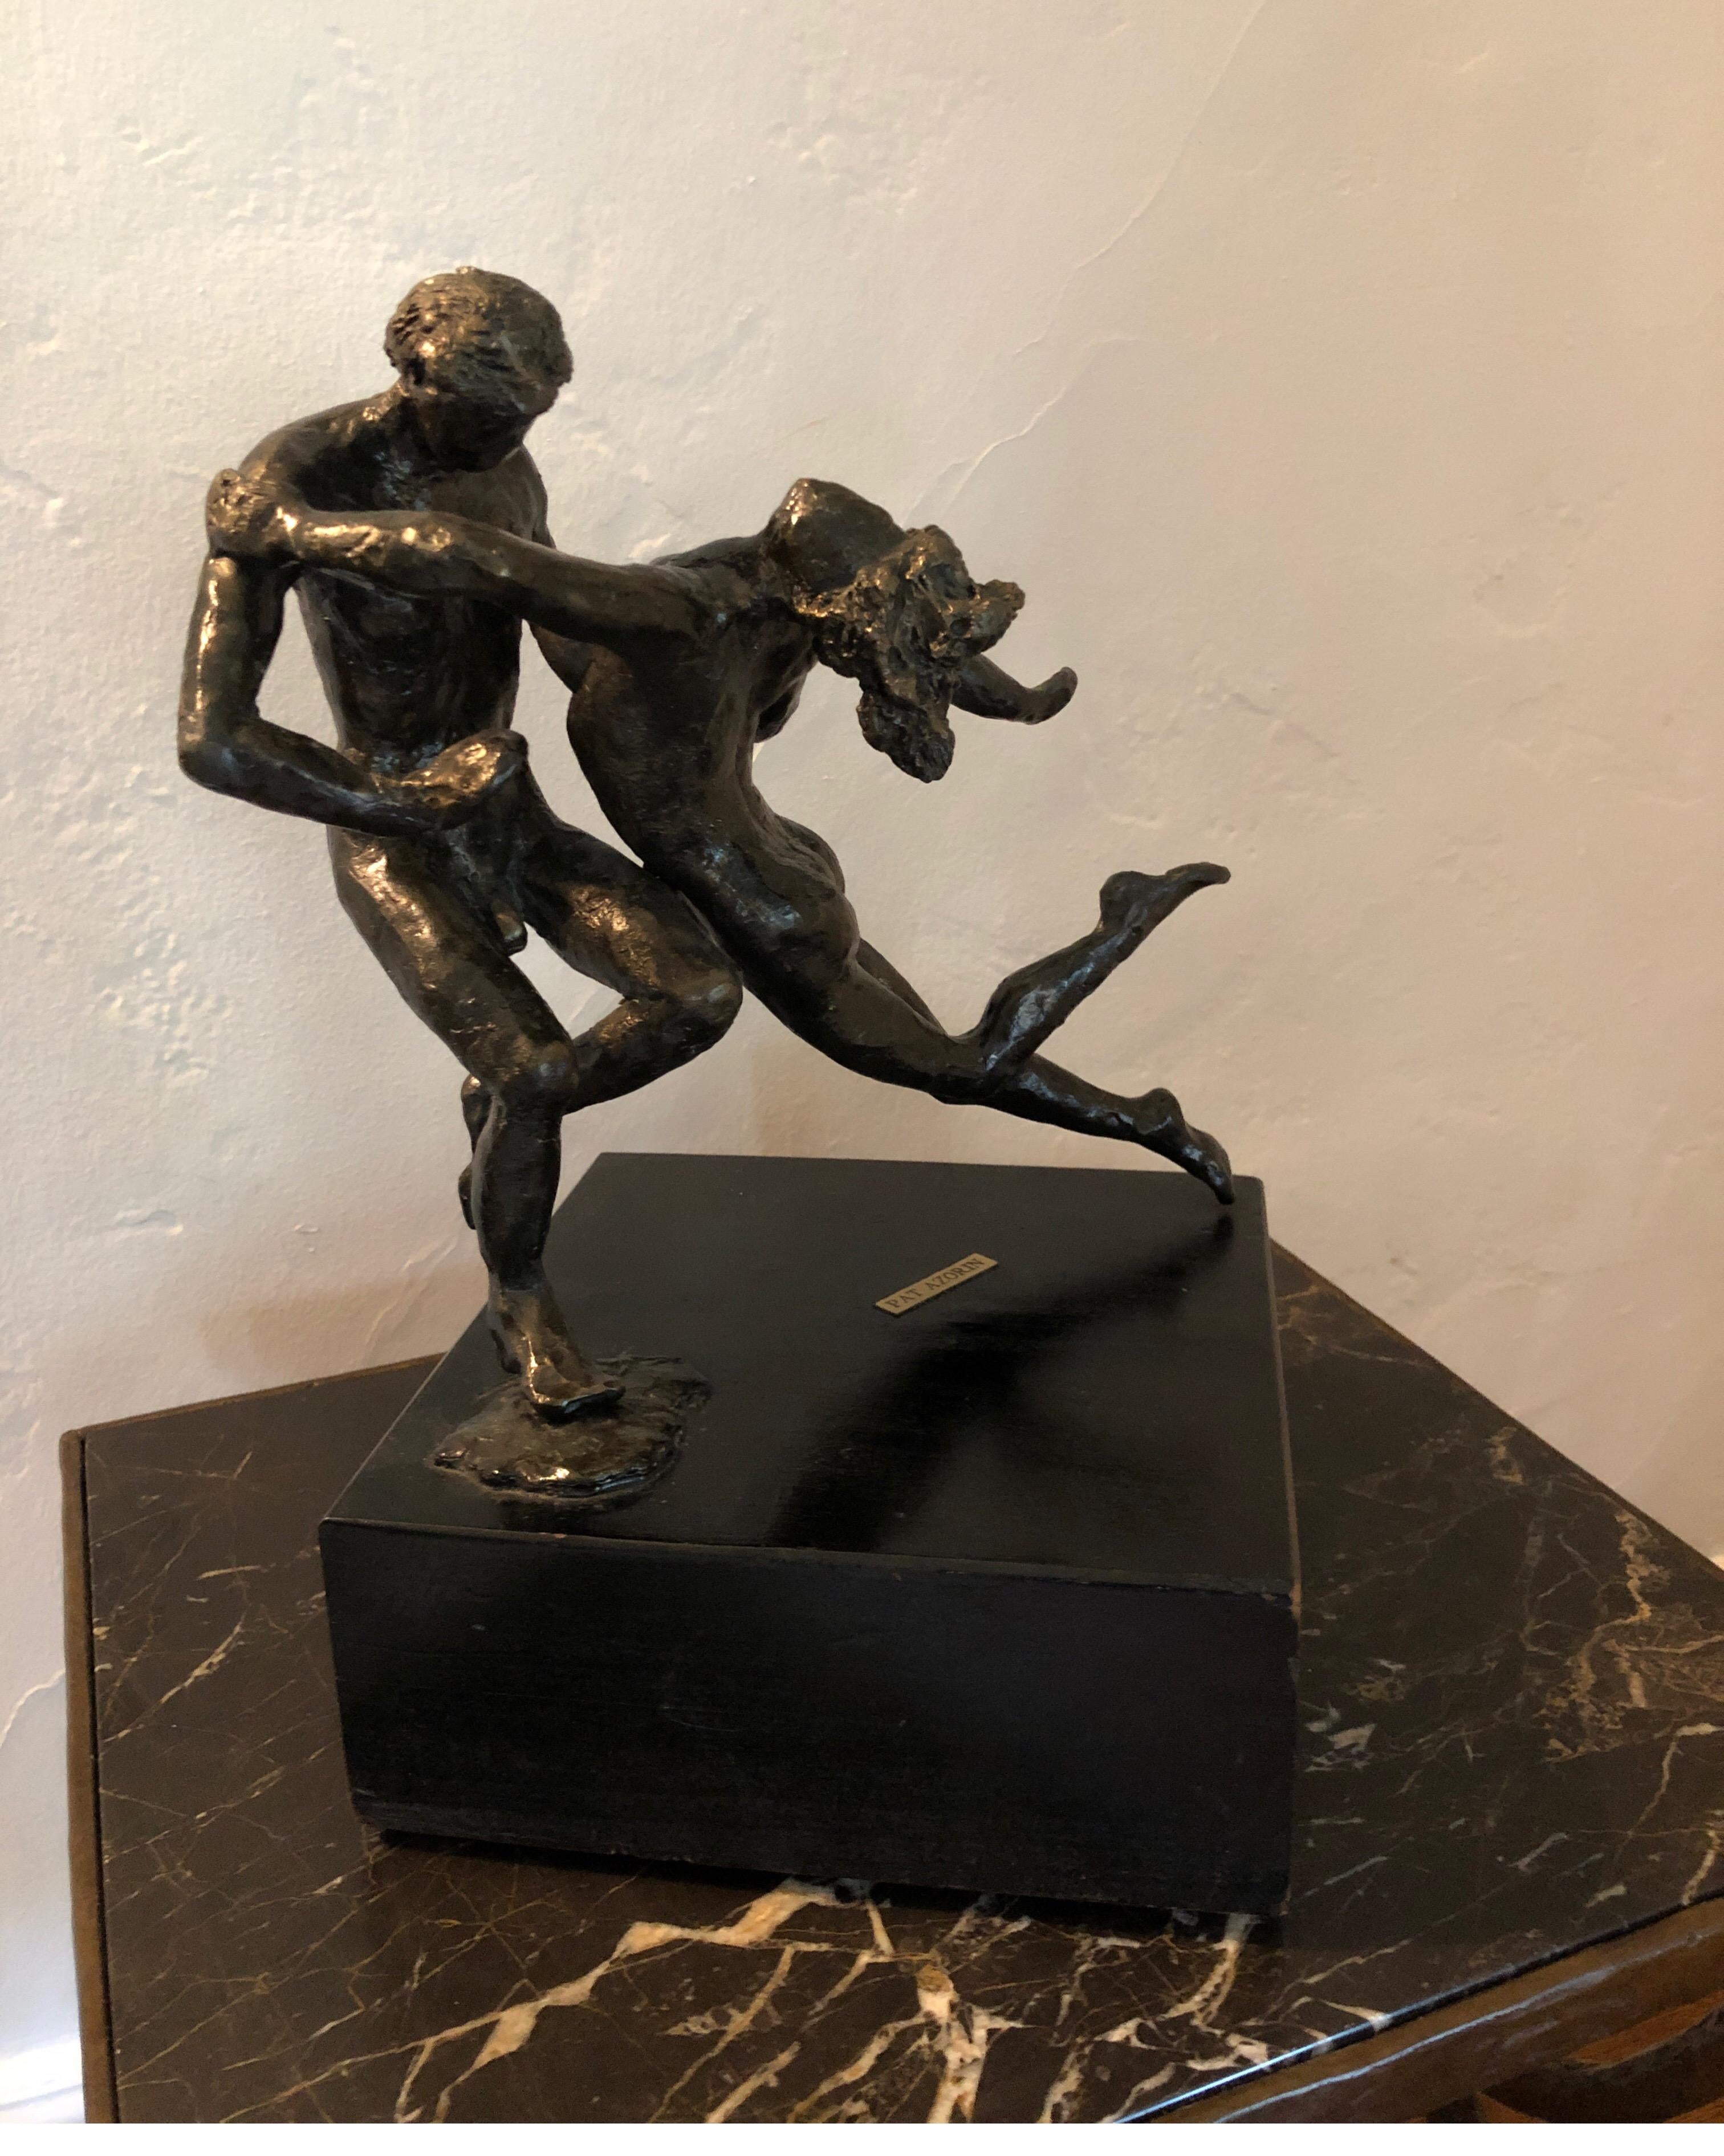 Bronze statue of nudist man and woman ballet dancing. Woman’s legs extended with her head back in spinning motion.
Cannot find any signature on the statue, but has Edgar Degas style.
Mounted on a wood base with built in turning swivel. Has the